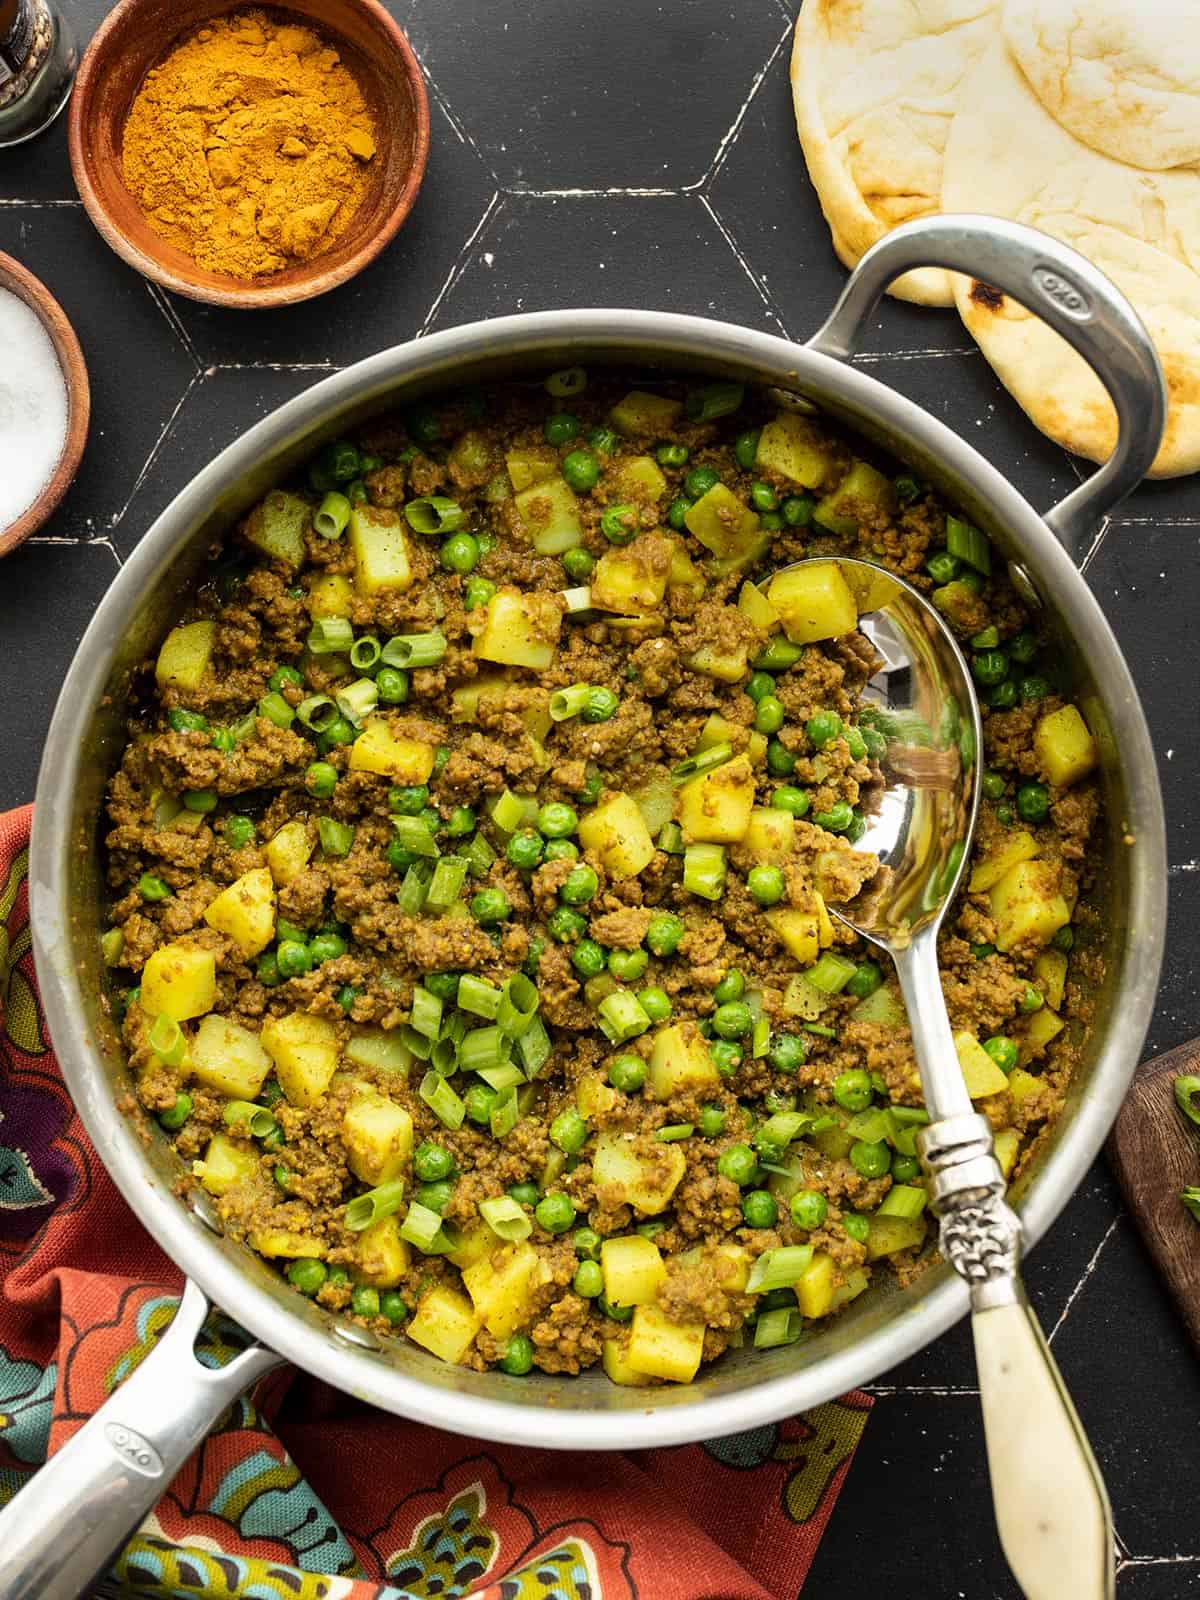 https://www.budgetbytes.com/wp-content/uploads/2012/10/Curried-Ground-Beef-with-Peas-V1.jpg